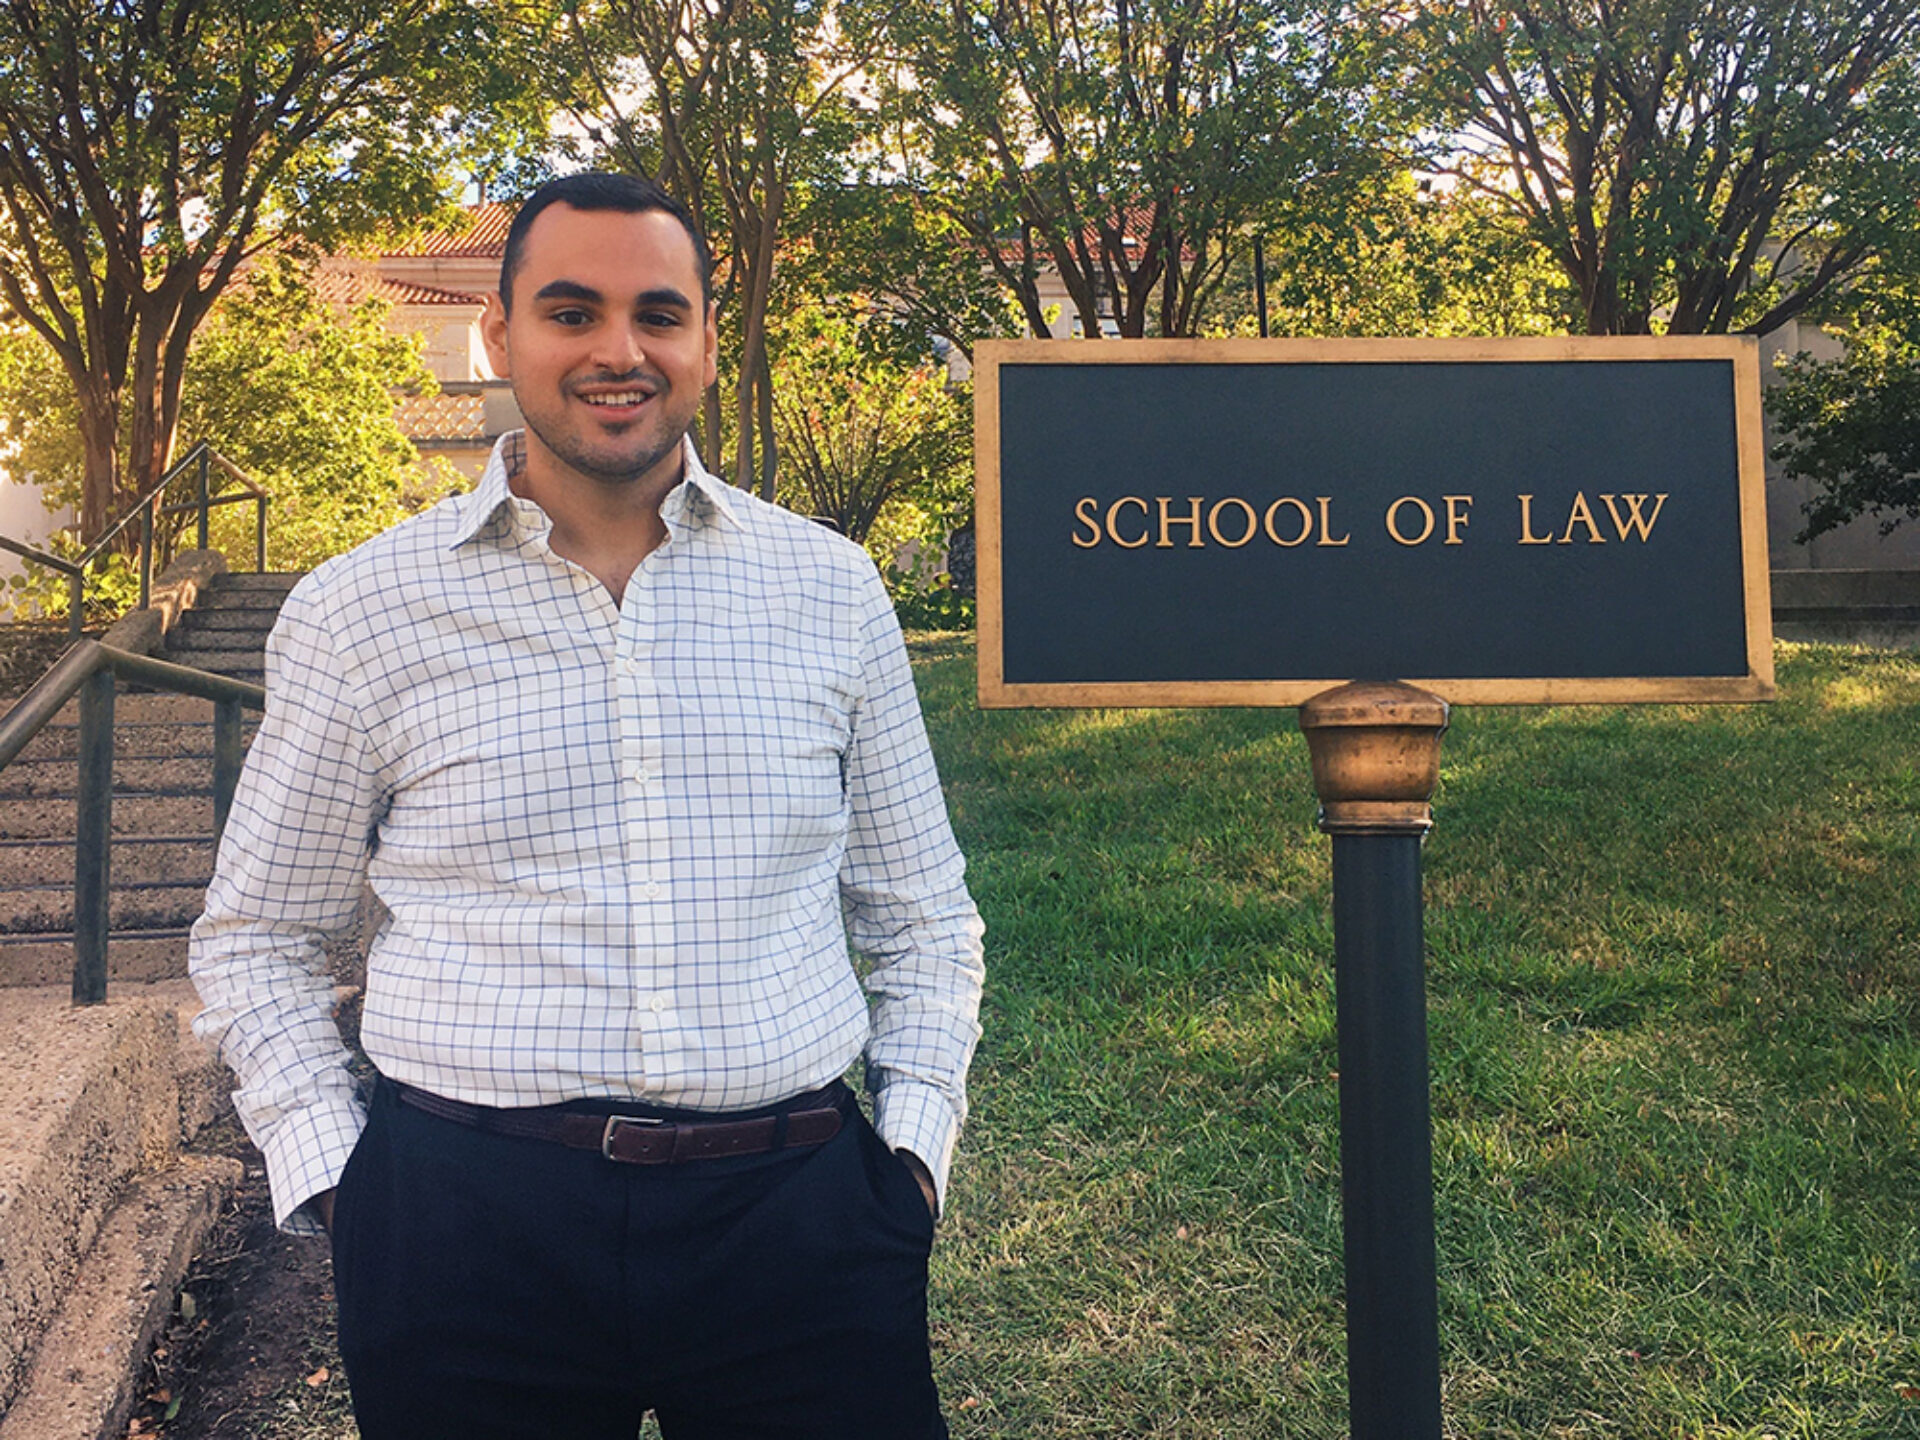 William Zakhary, pictured in front of the School of Law sign.